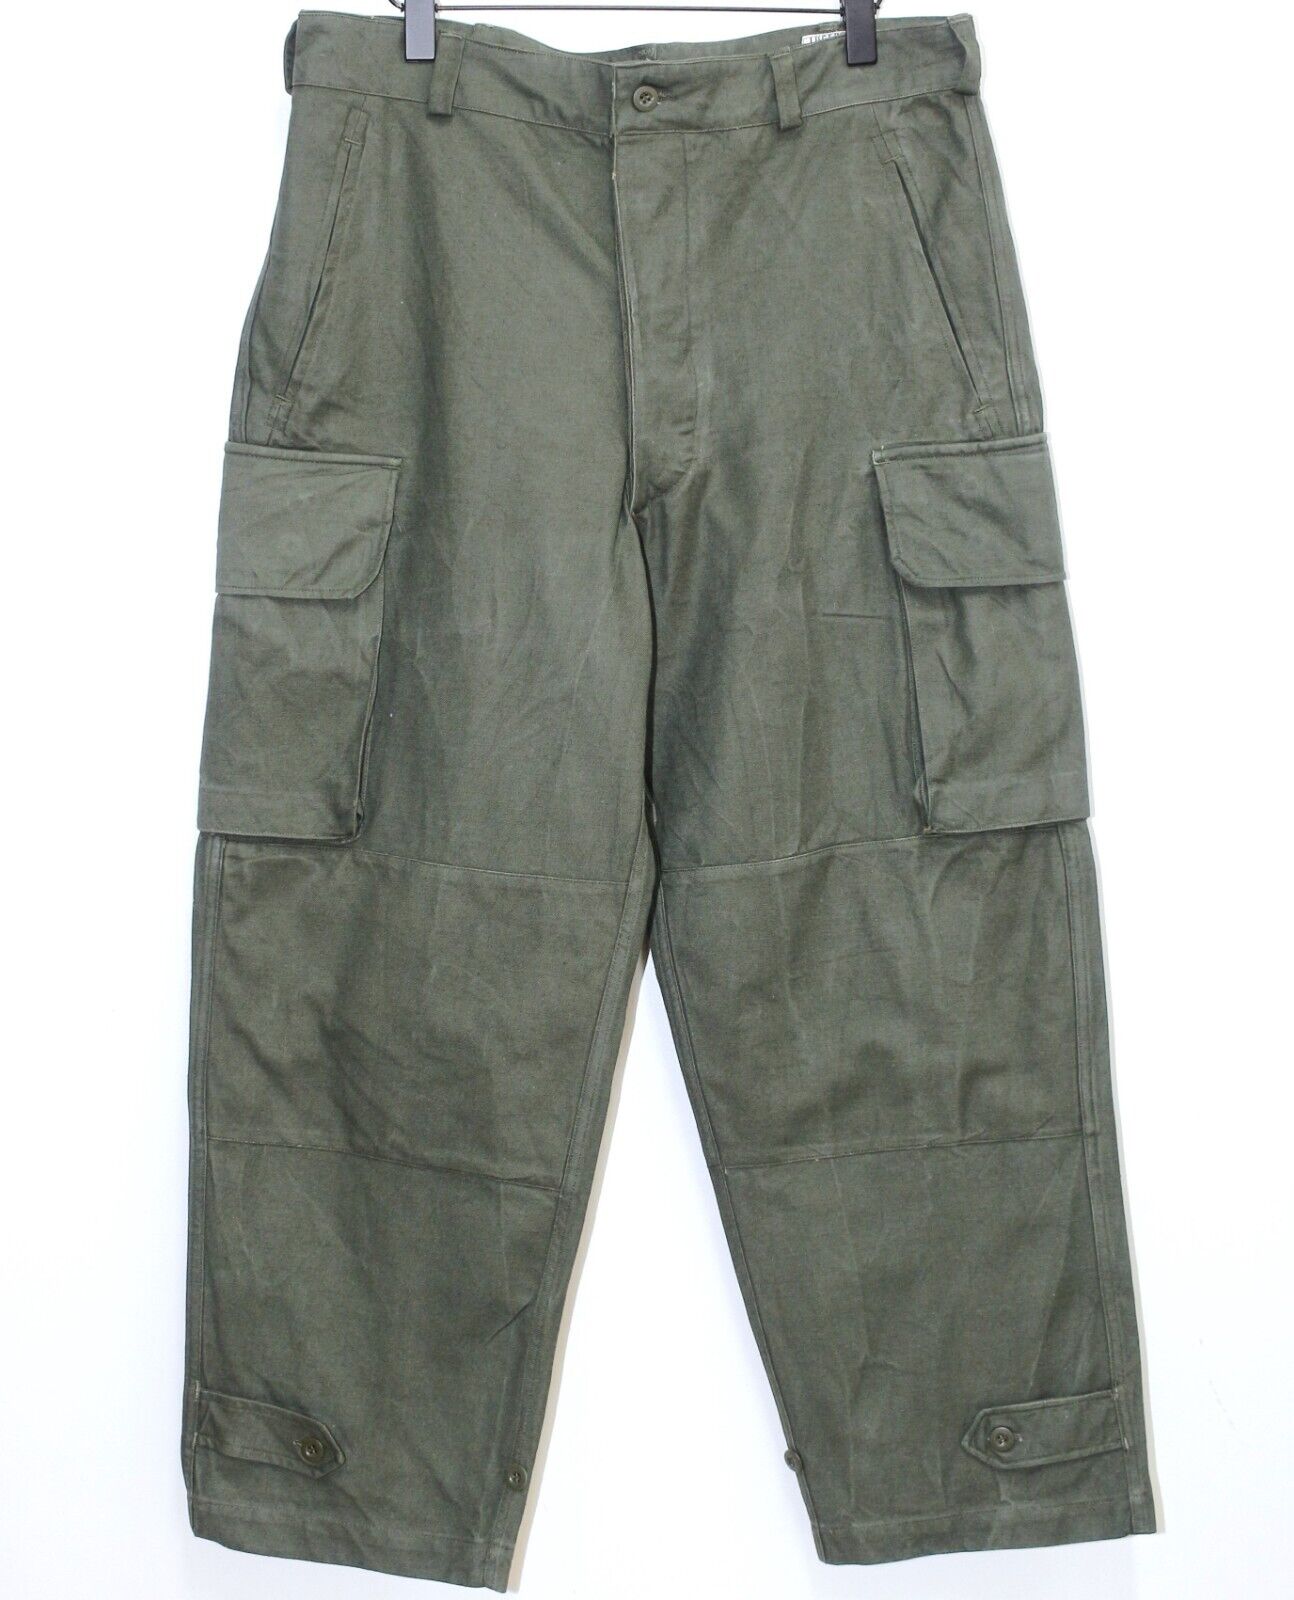 Genuine Indochina French Army M47 Cargo Pants /Trousers Size W35 Made in France